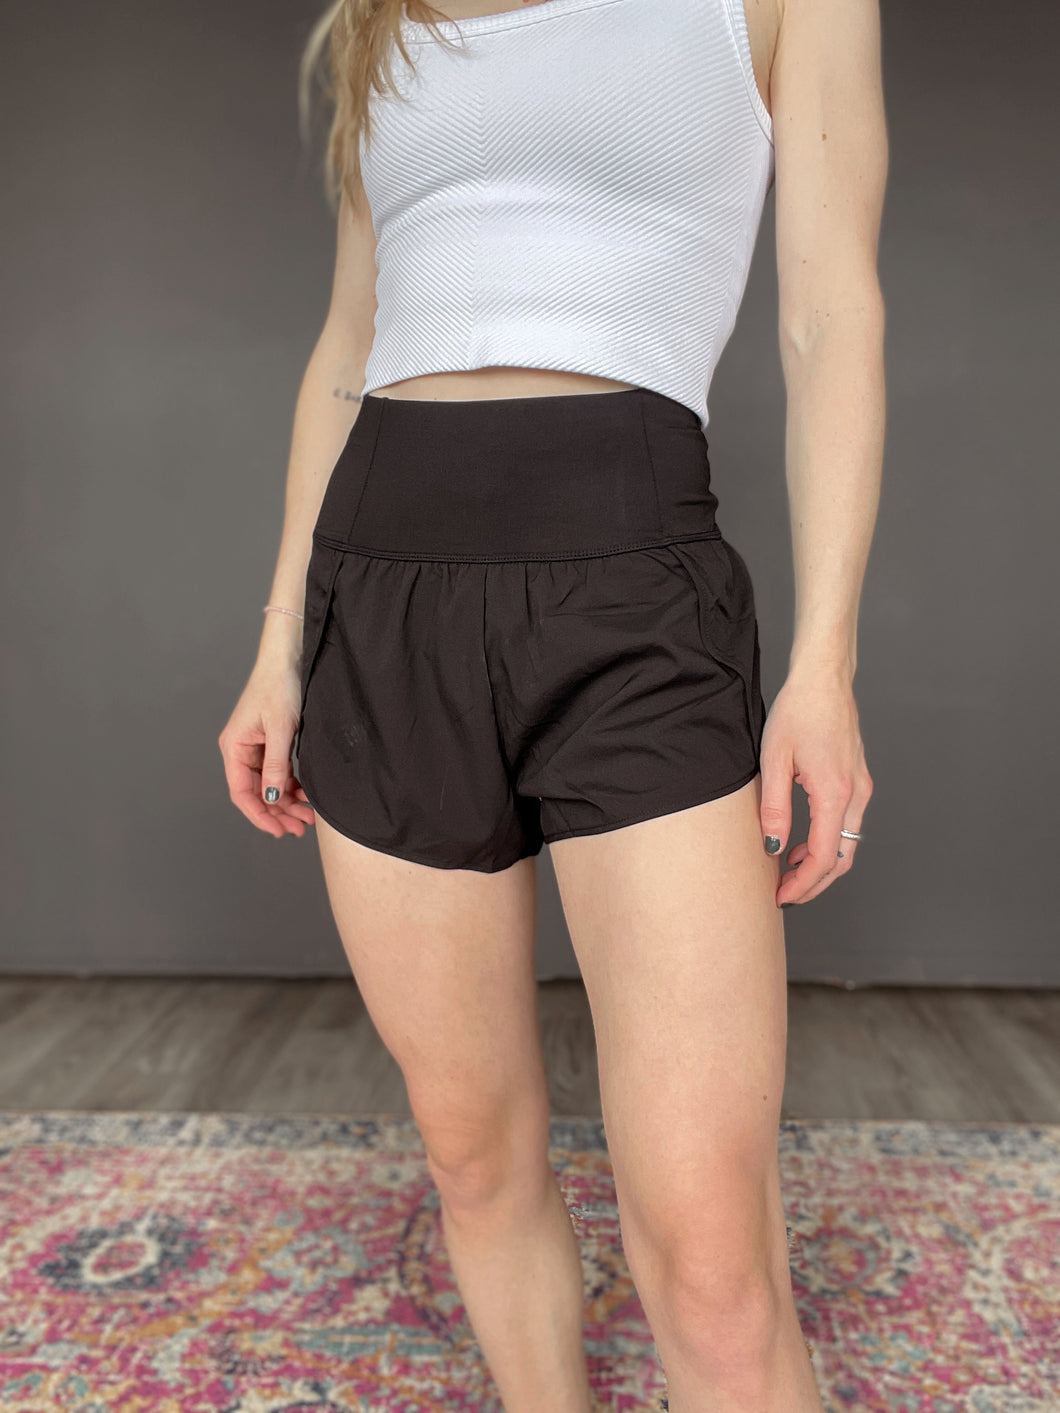 Women's Black or Baby Blue Lined Athleisure Shorts